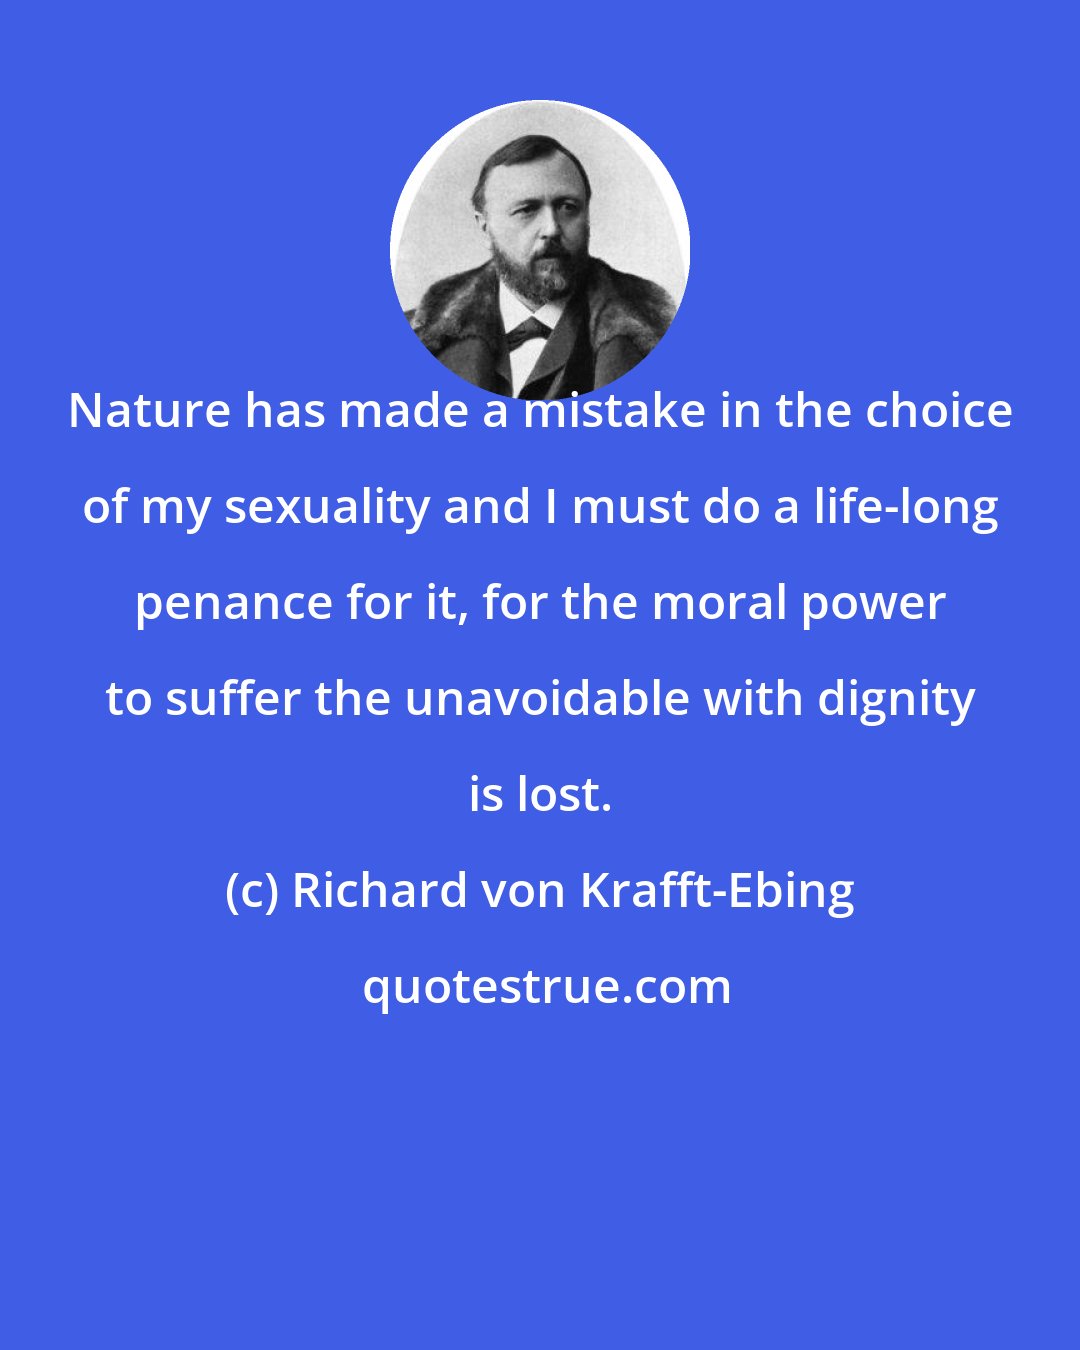 Richard von Krafft-Ebing: Nature has made a mistake in the choice of my sexuality and I must do a life-long penance for it, for the moral power to suffer the unavoidable with dignity is lost.